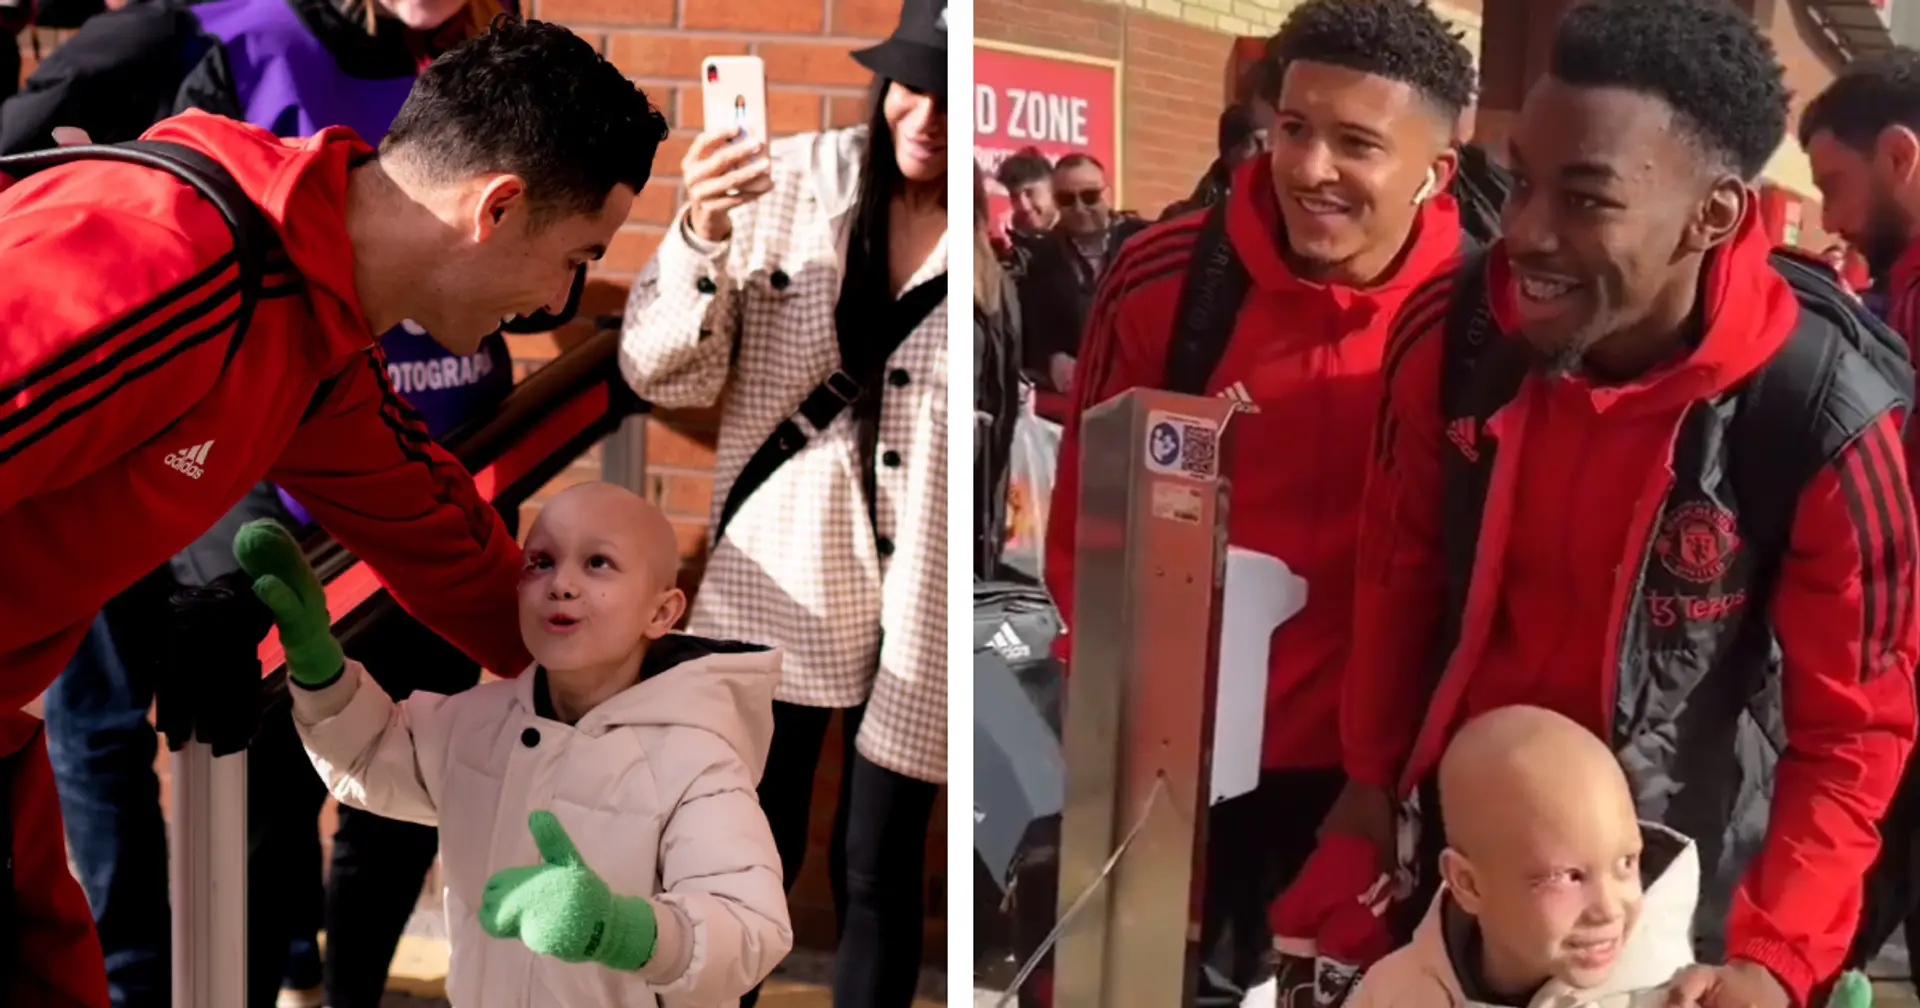 Man United players share heart-warming moment with young fan battling cancer